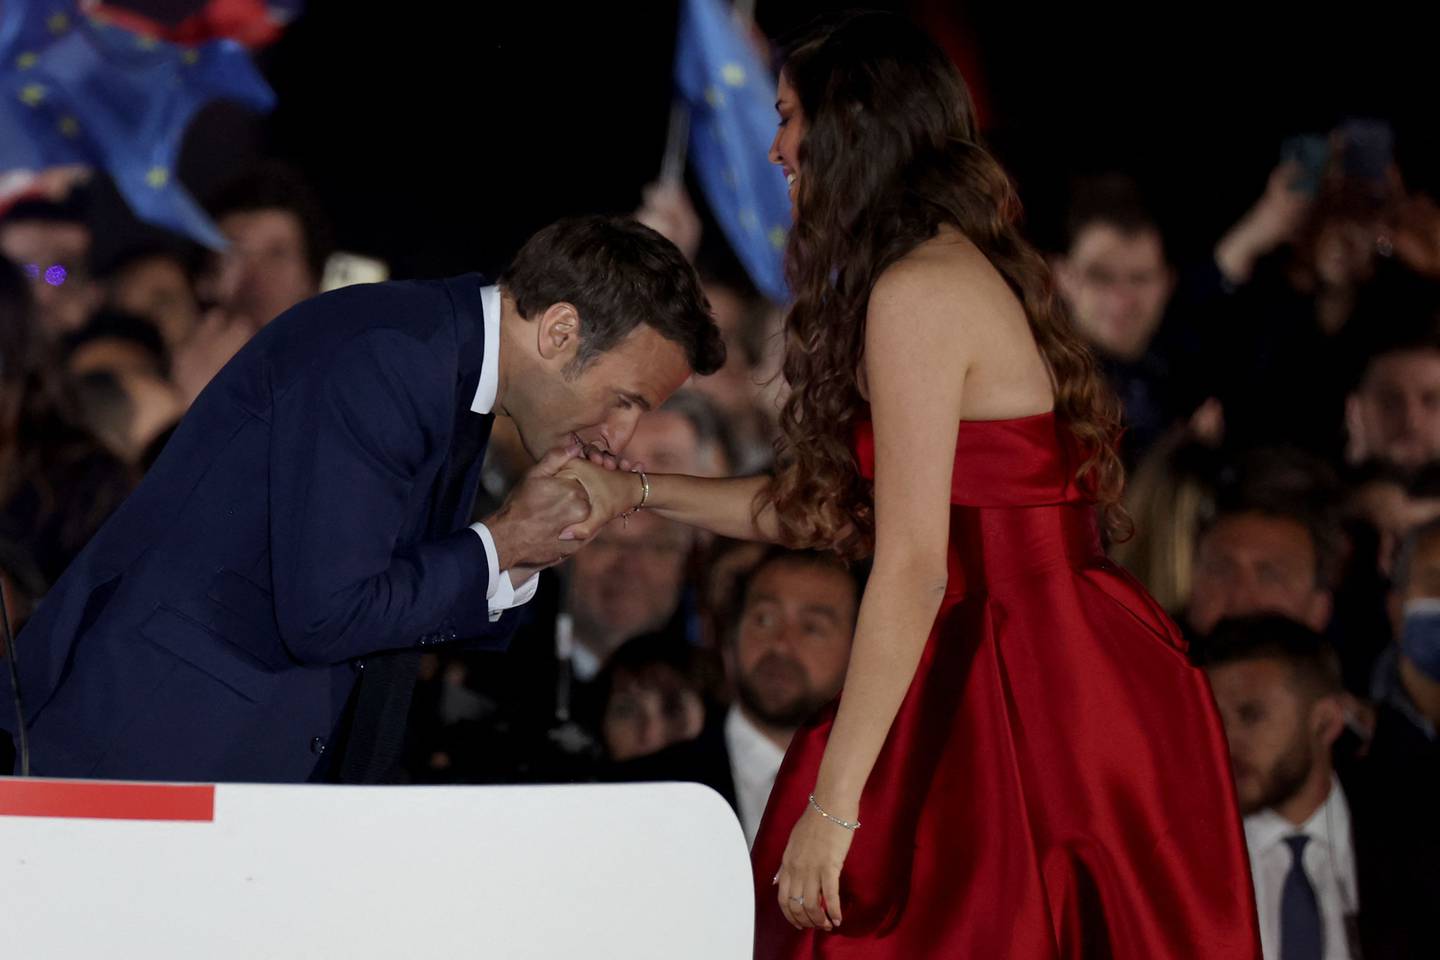 French President Emmanuel Macron greets Egyptian opera singer Farrah El Dibany following his victory in France's presidential election on Sunday. AFP